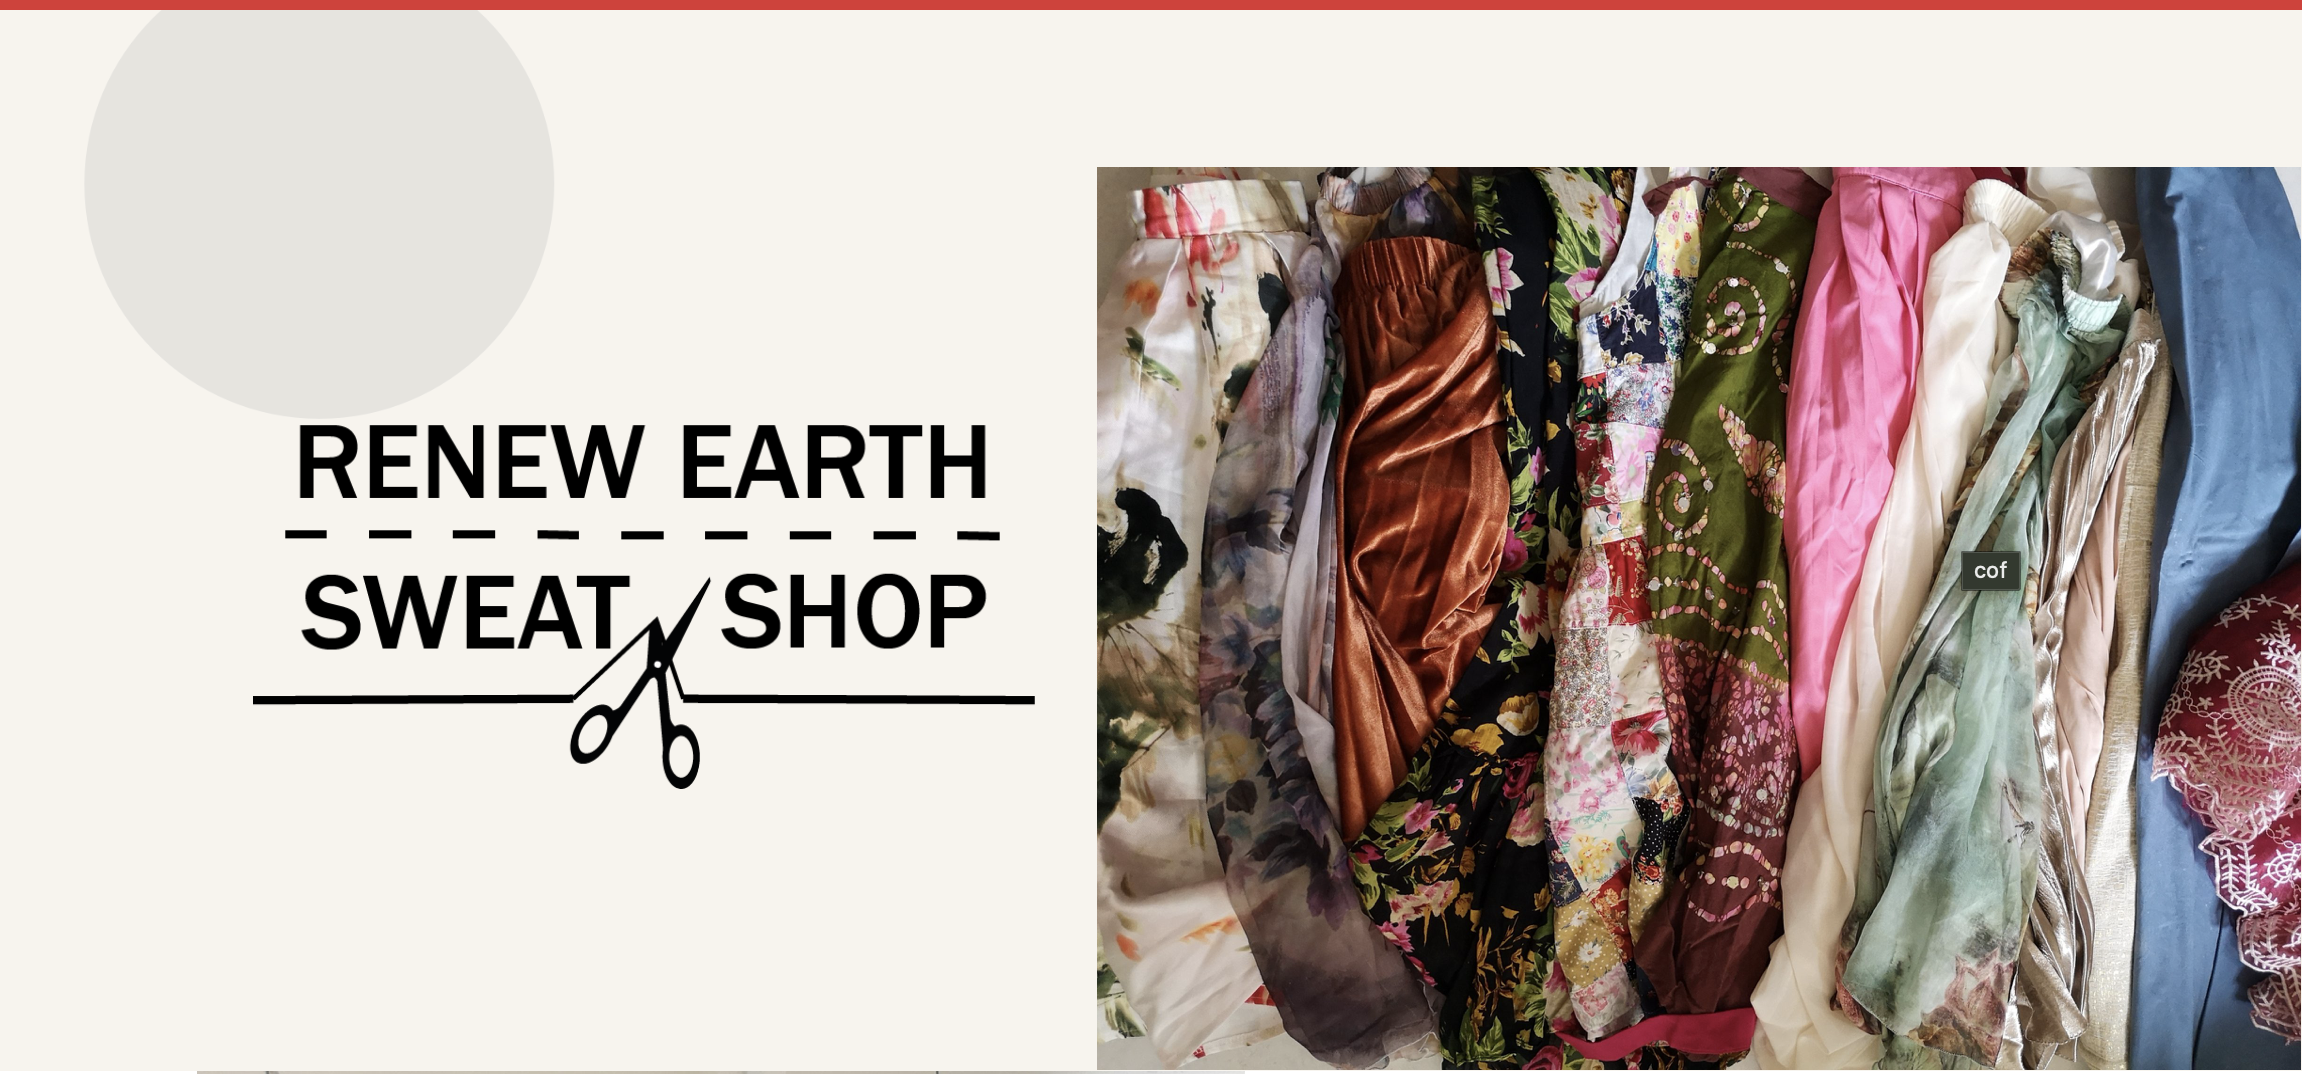 Renew Earth Sweat Shop and Temasek Shophouse invites innovations in fashion ‘repair’